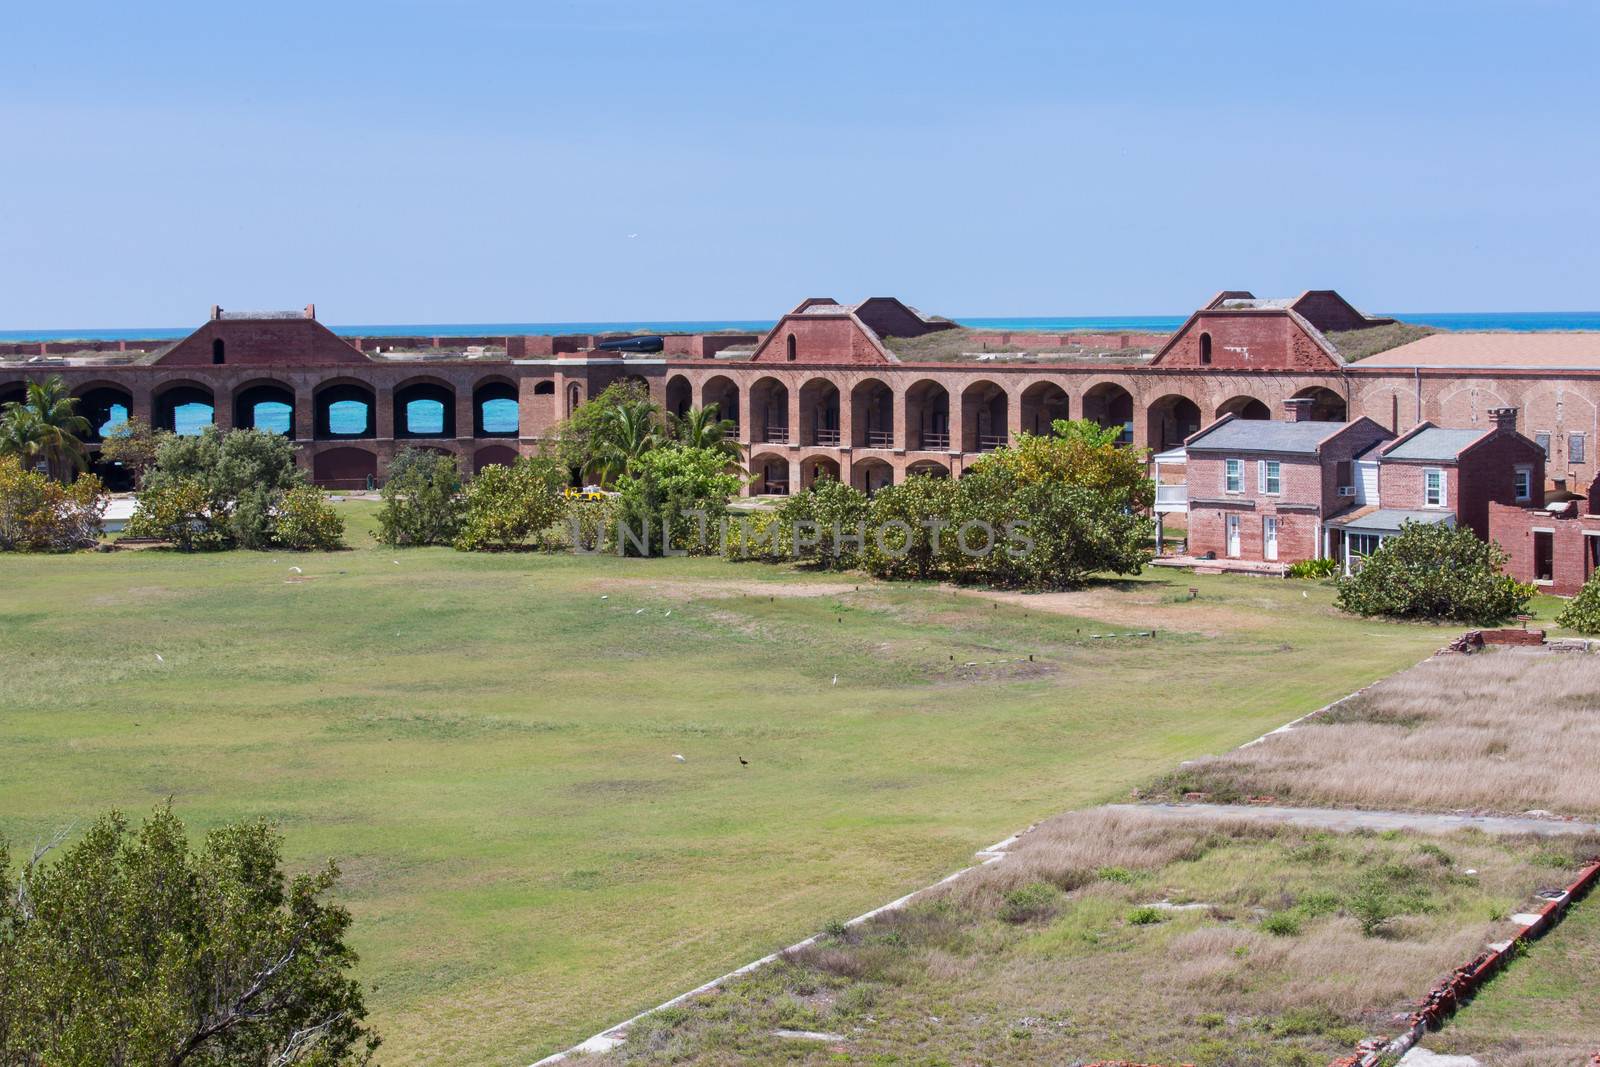 This is an image from the inside of Fort Robinson at the Dry Tortugas.